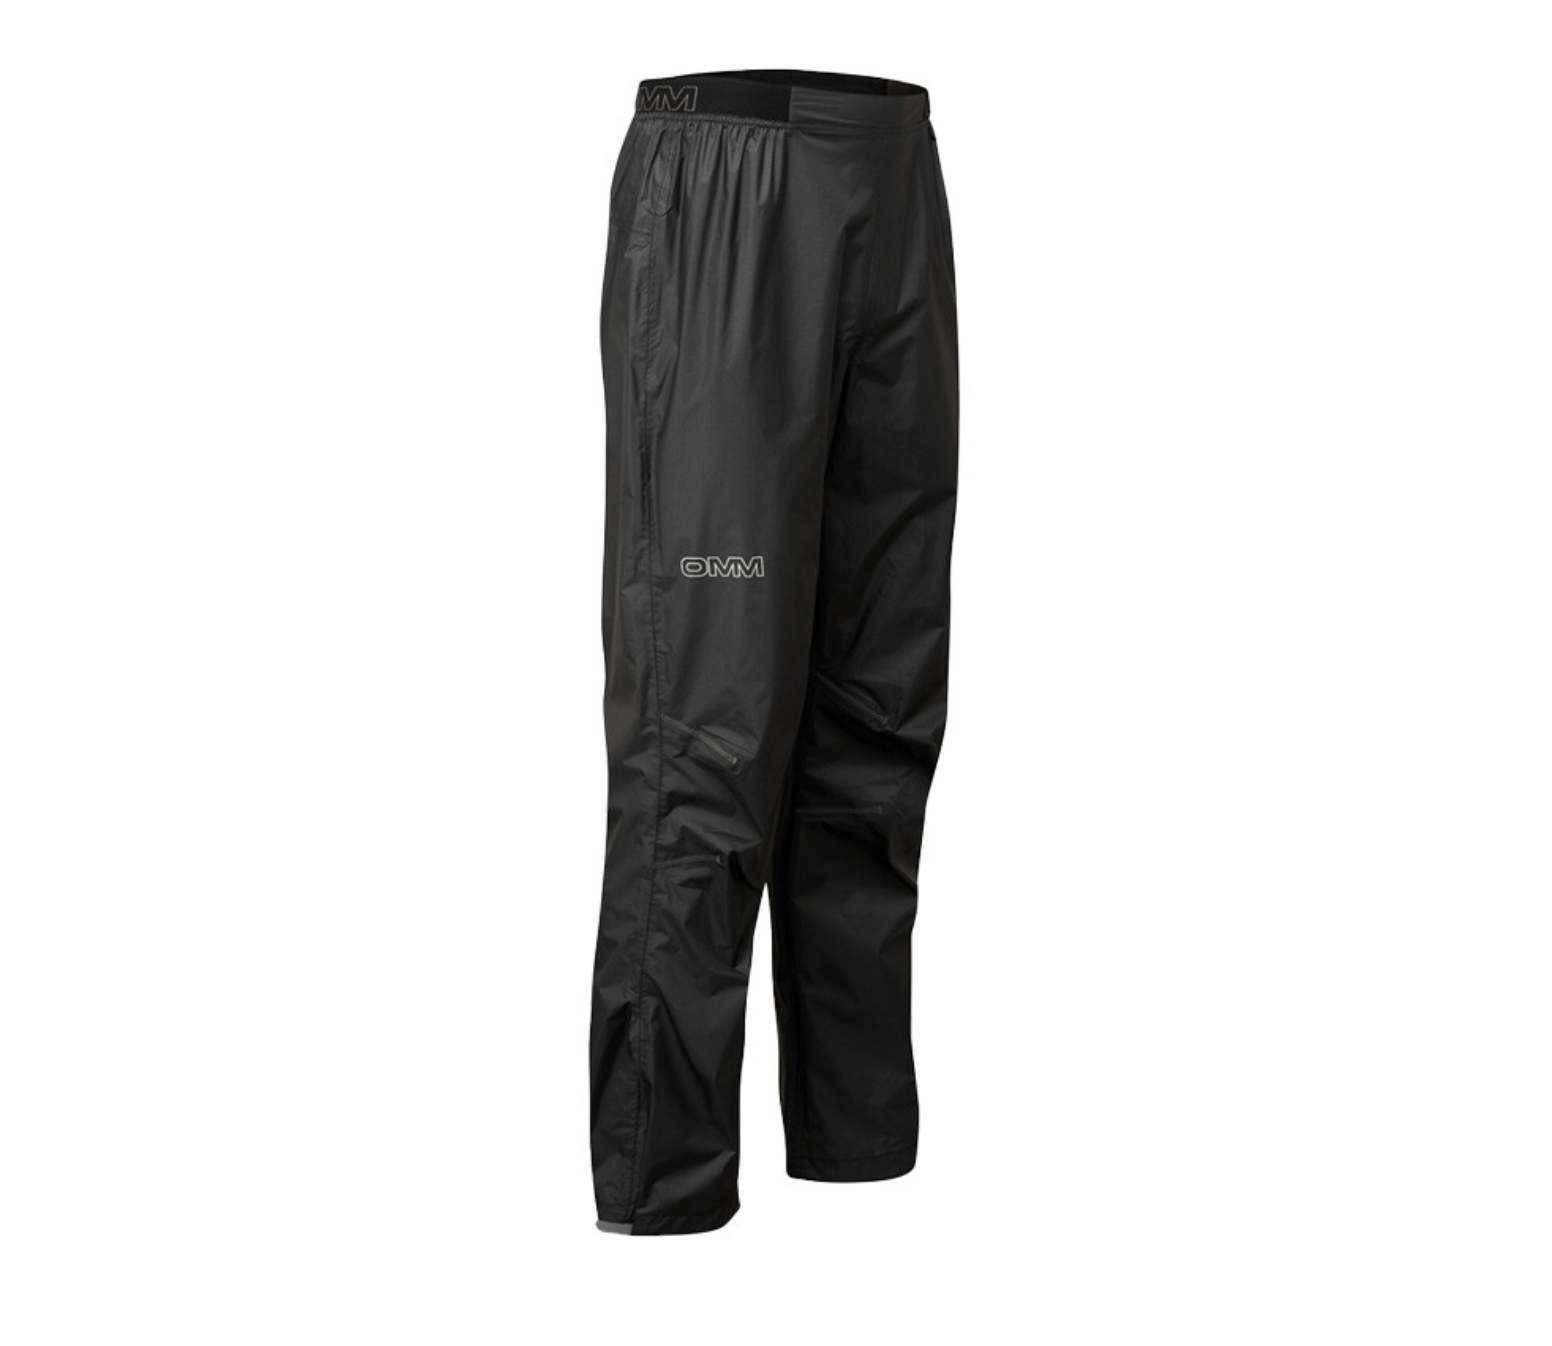 Acme Projects Waterproof Over Trousers, 100% Waterproof, Breathable, Taped  Seam, 10000mm/3000gm (Men's, Small, Black) : Amazon.co.uk: Fashion